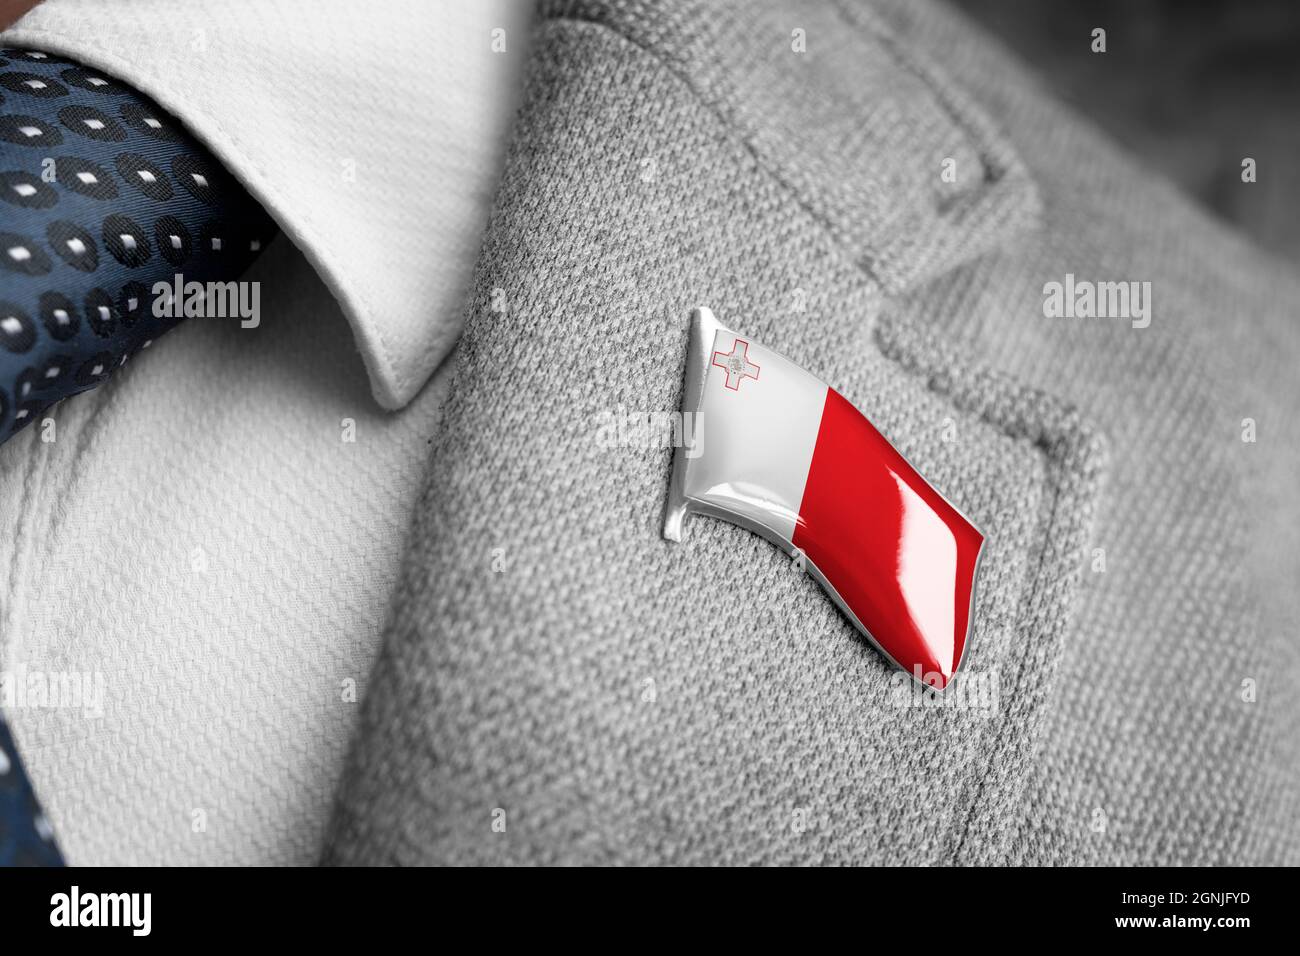 Metal badge with the flag of Malta on a suit lapel Stock Photo